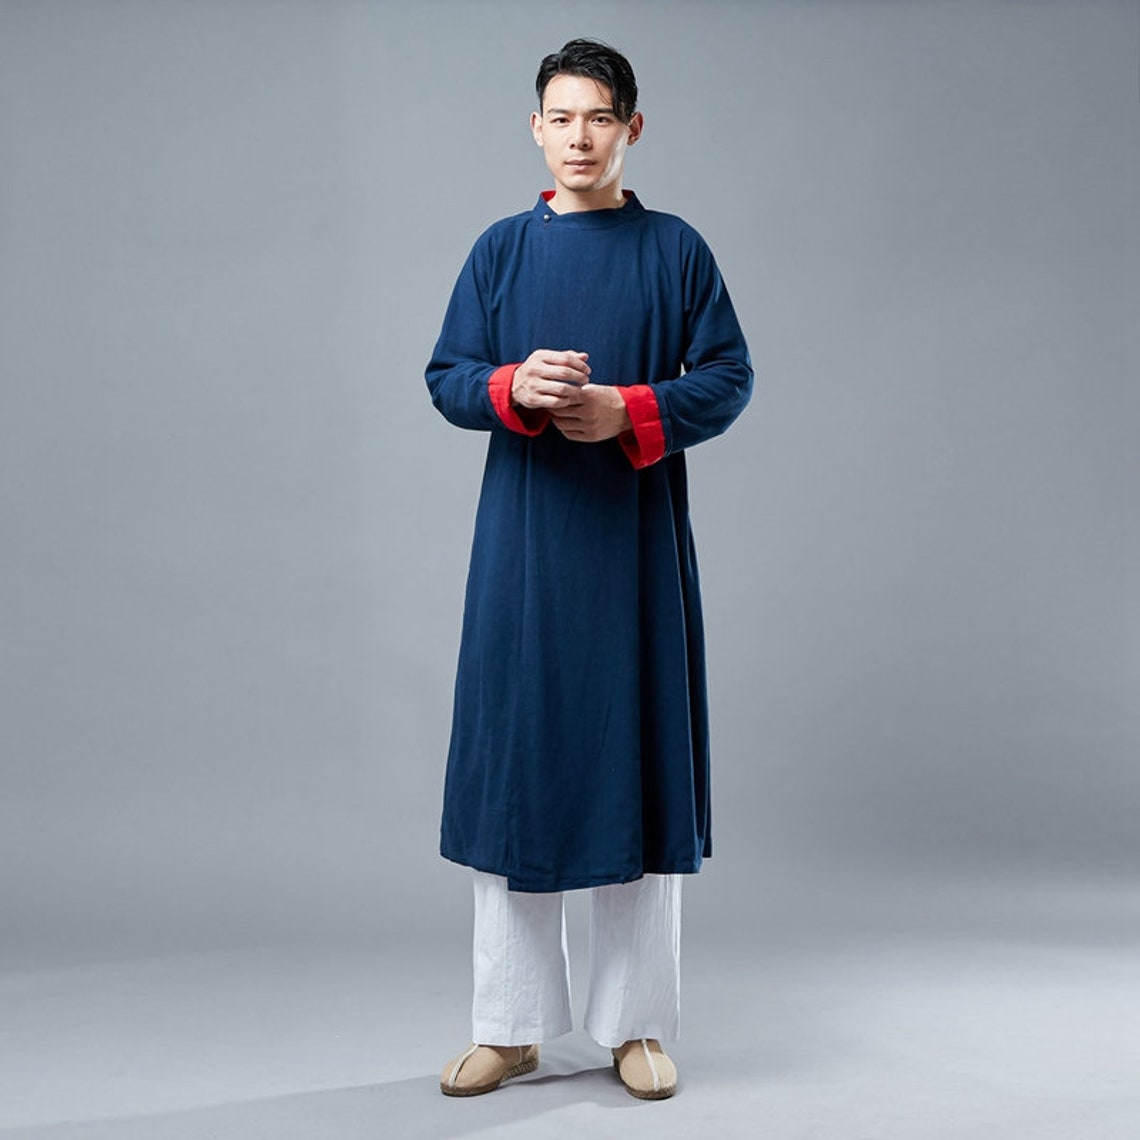 Traditional Chinese Men's Cheongsam. Men's Robes. - Etsy Canada